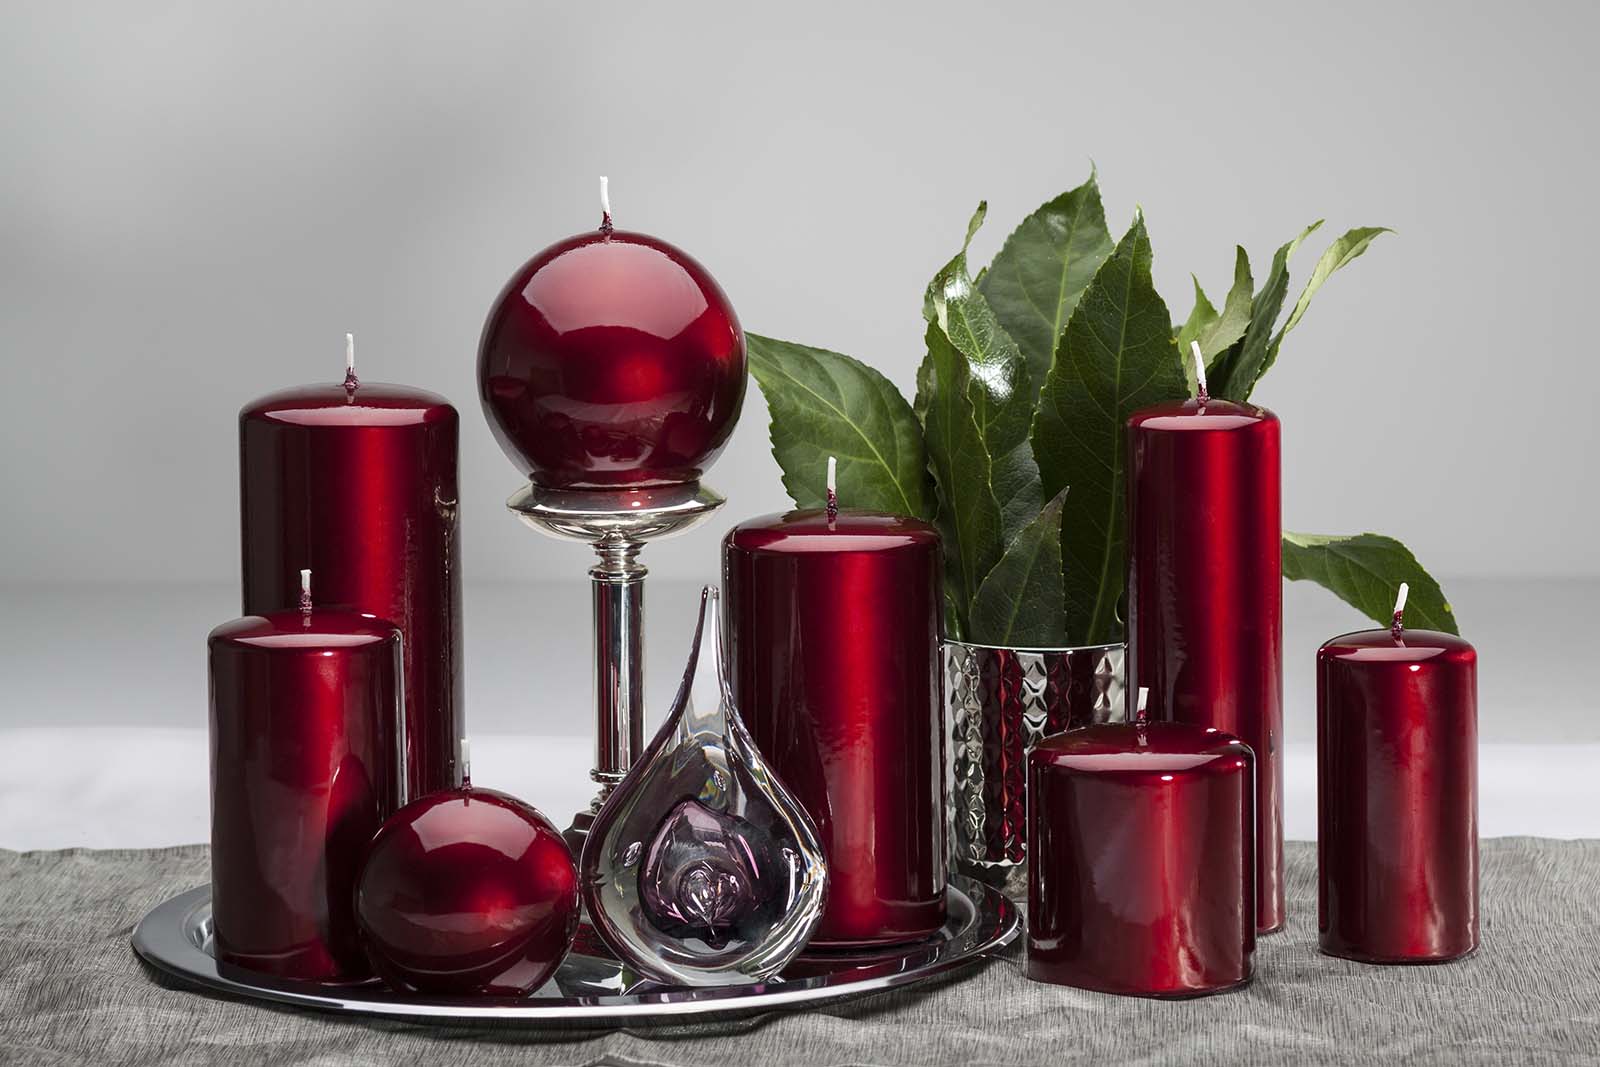 Pillar and round burgundy candles displayed on silver platter with glass candle holder and decorative glass teardrop